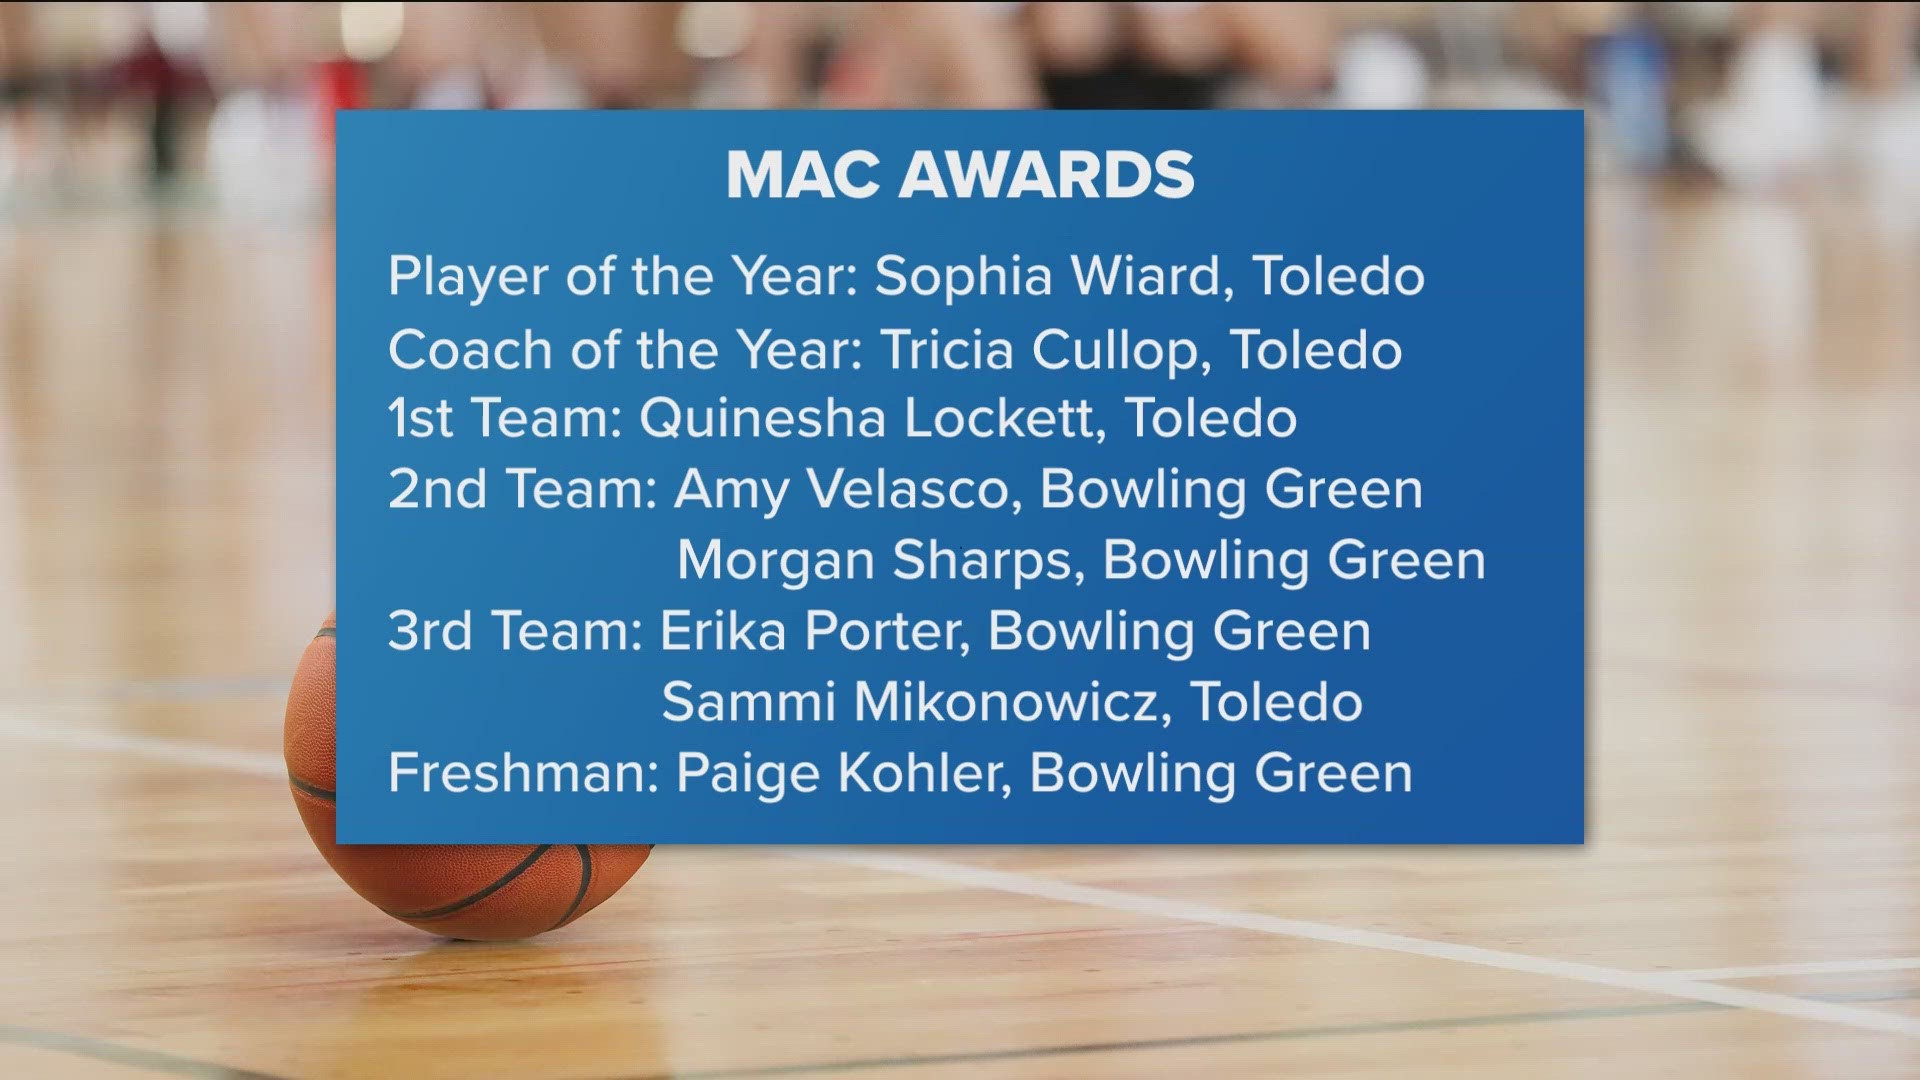 Toledo women's basketball was well represented in the MAC postseason awards, earning both the player of the year and the coach of the year honors.